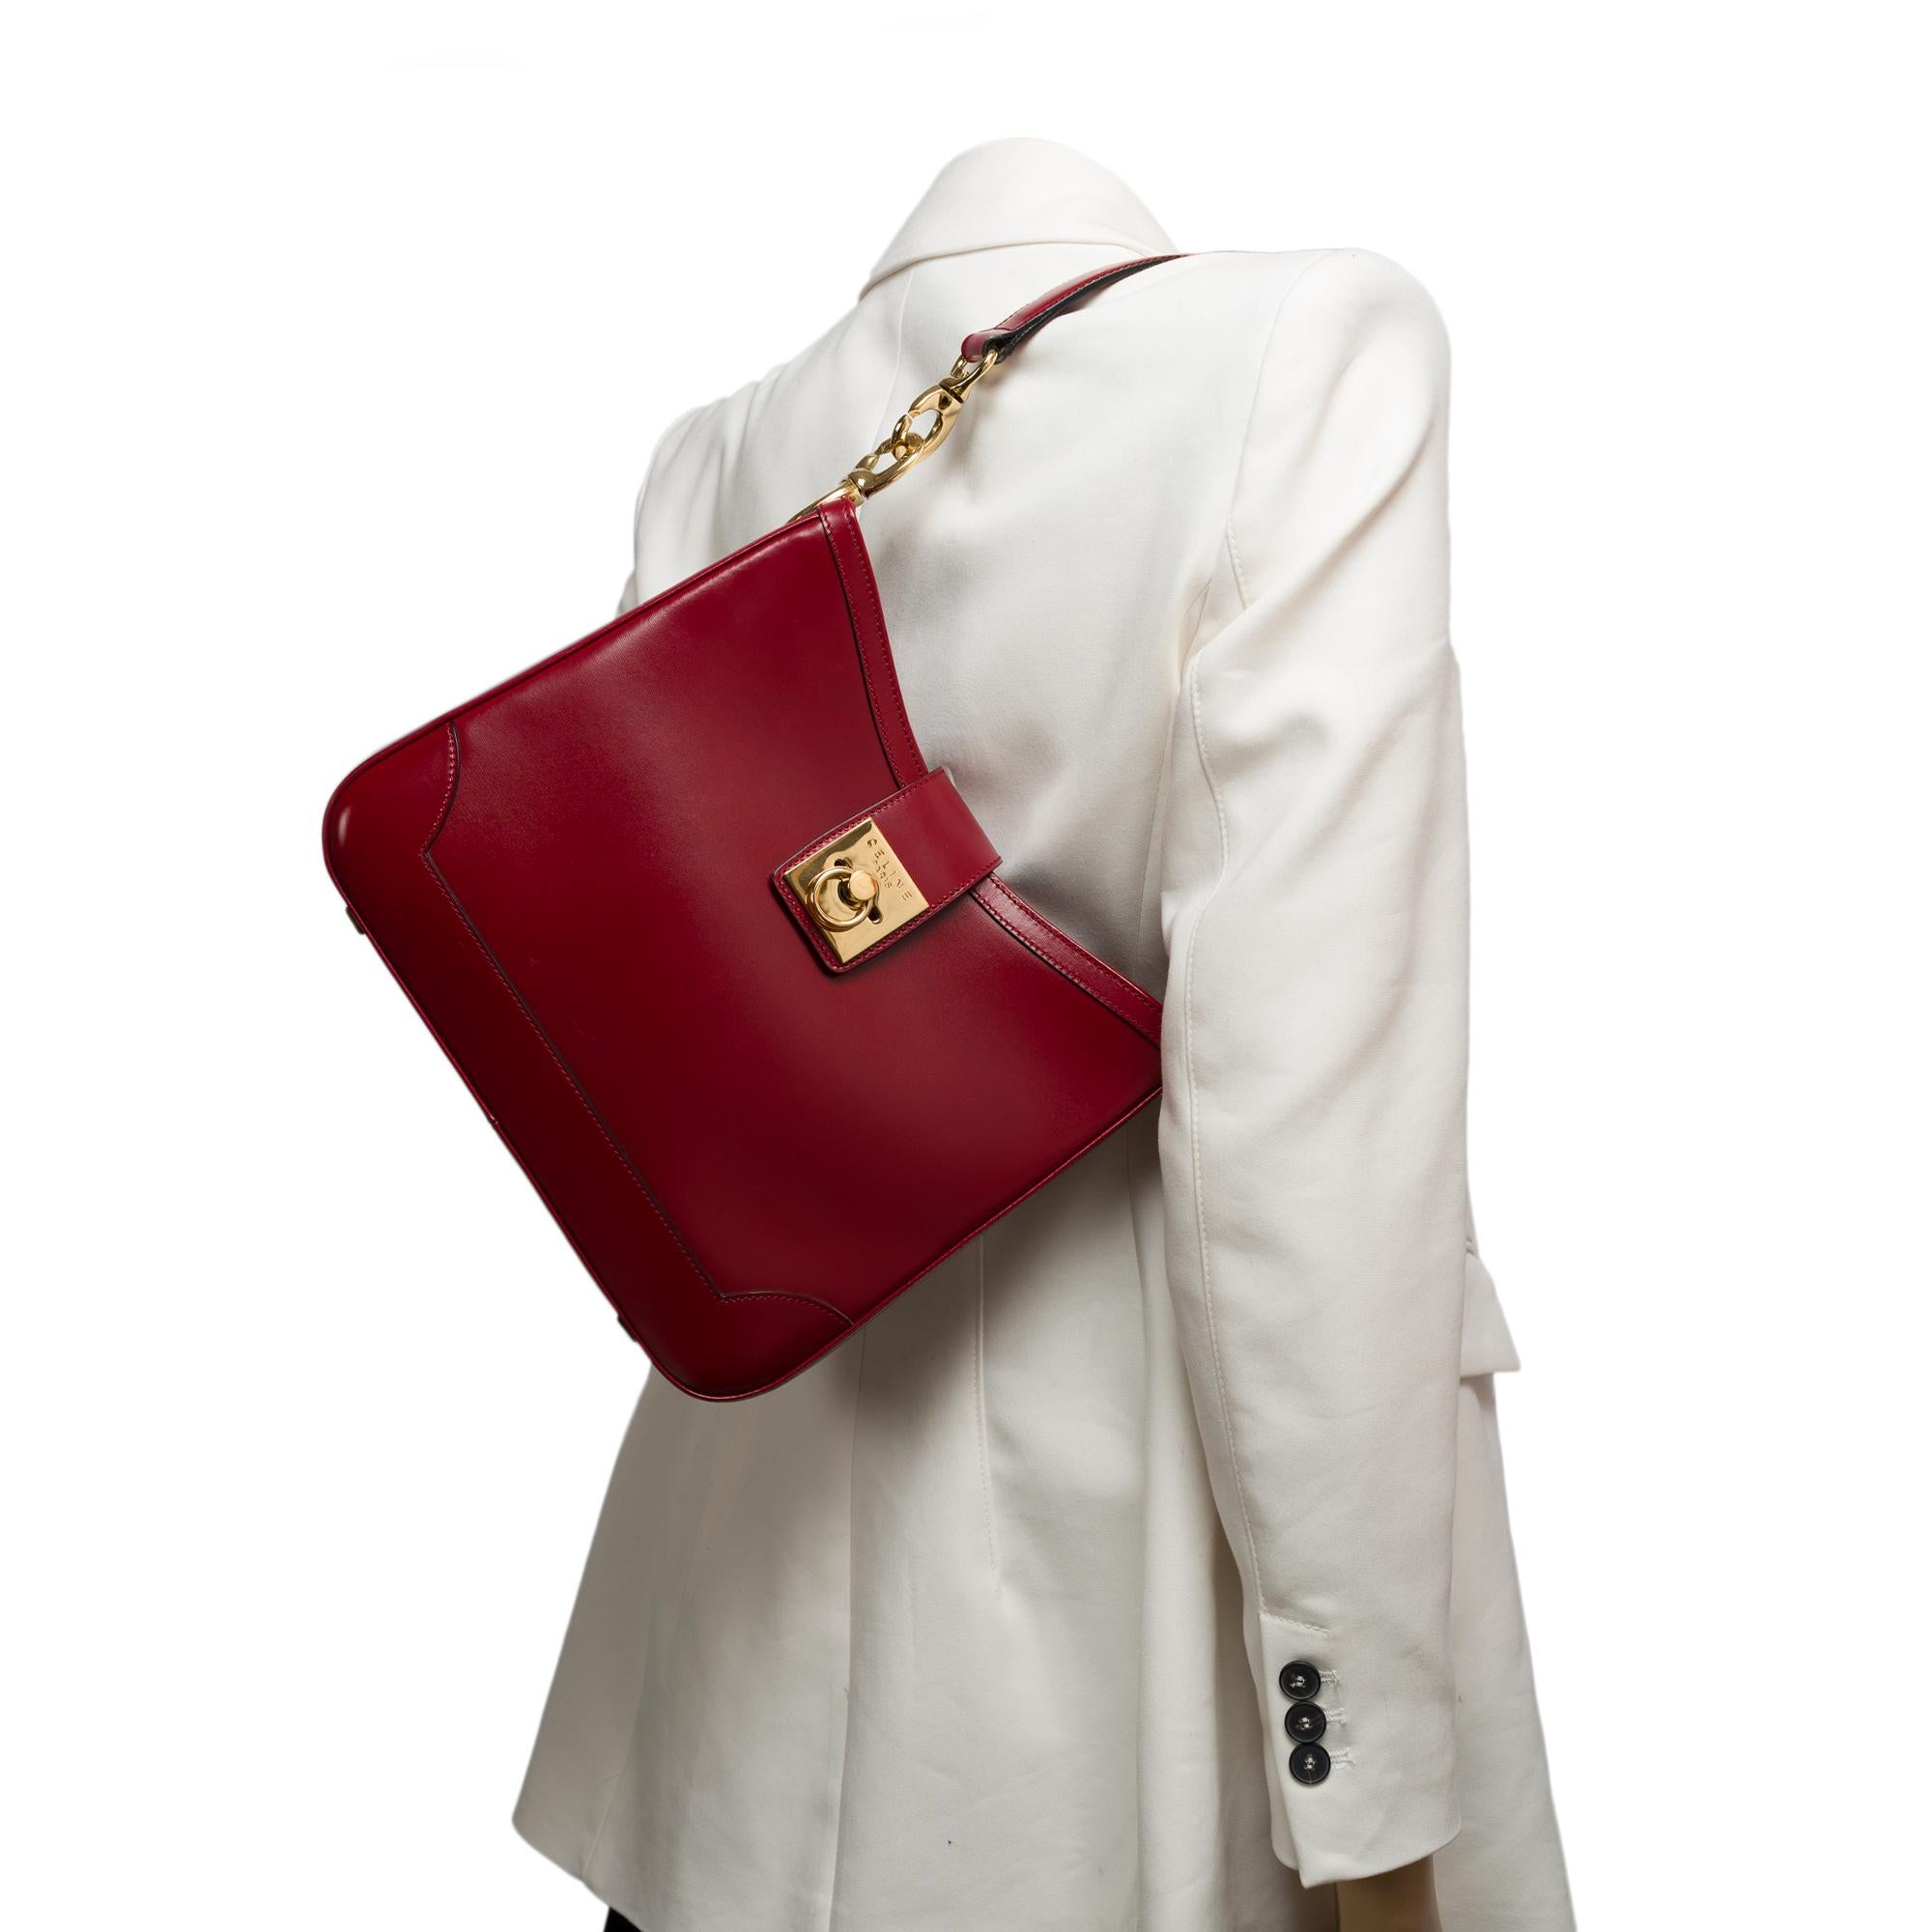 Gorgeous Celine vintage Tote bag in red cherry box calf, GHW 7